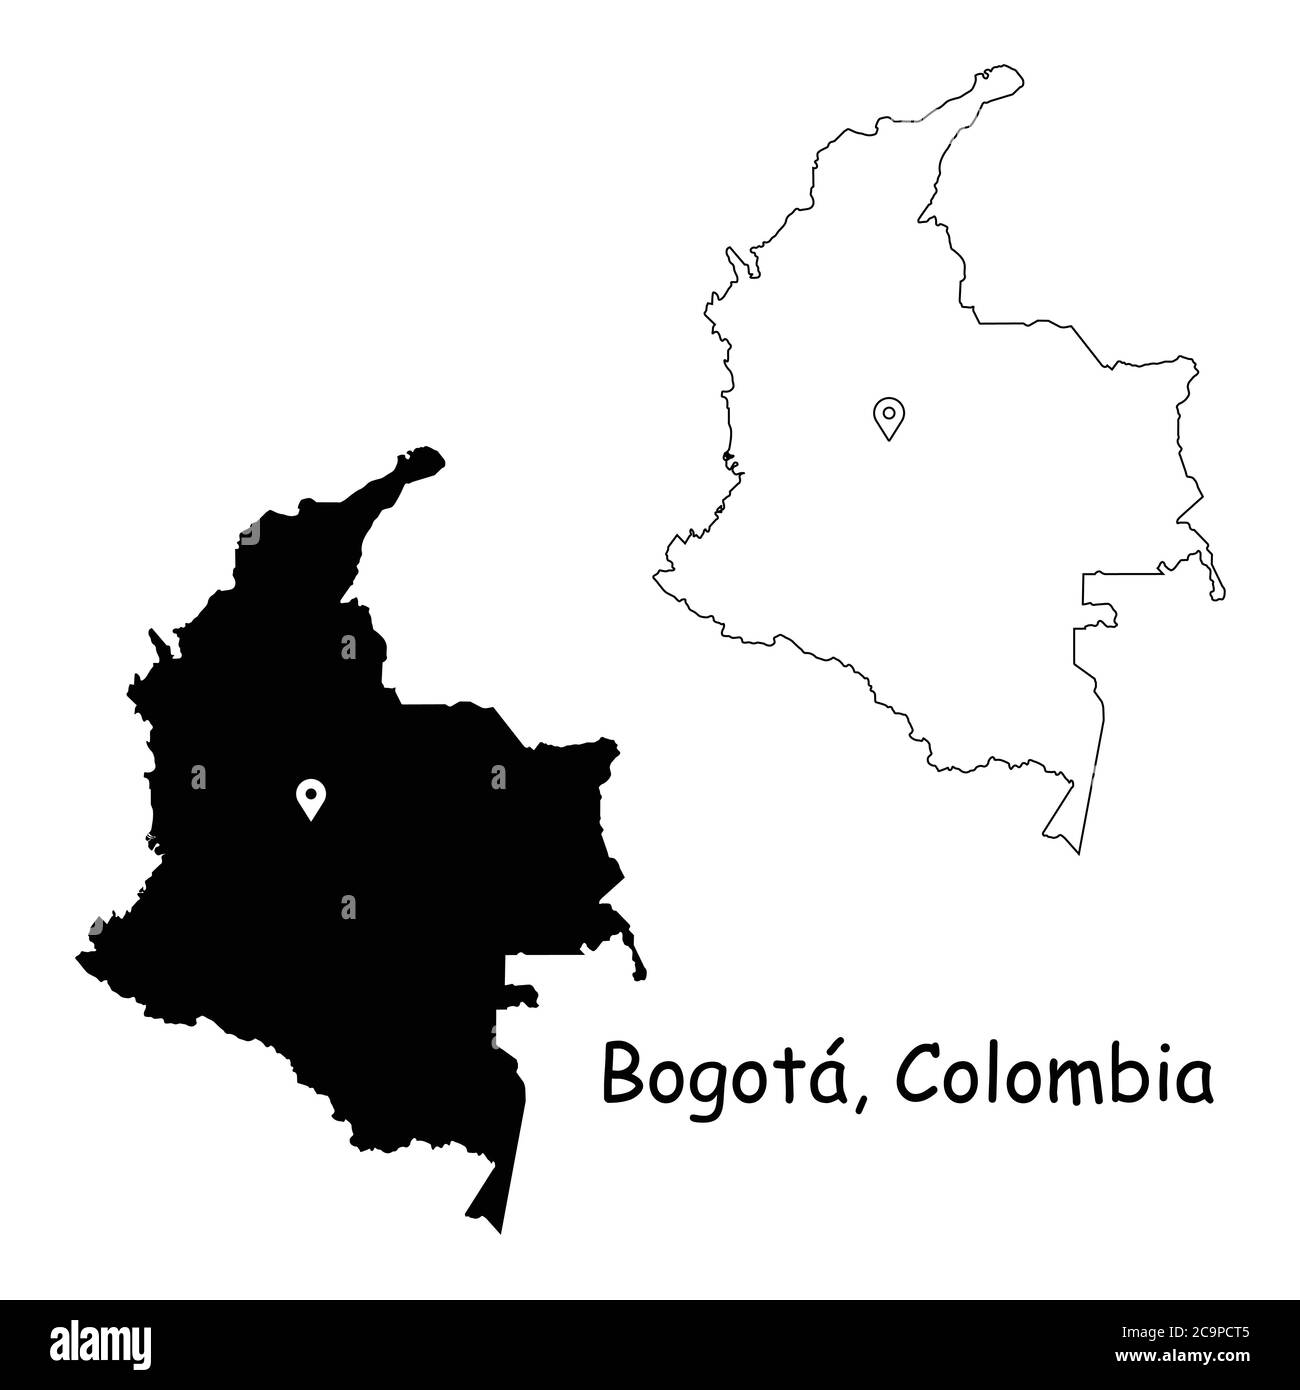 Bogota Colombia. Detailed Country Map with Location Pin on Capital City. Black silhouette and outline maps isolated on white background. EPS Vector Stock Vector